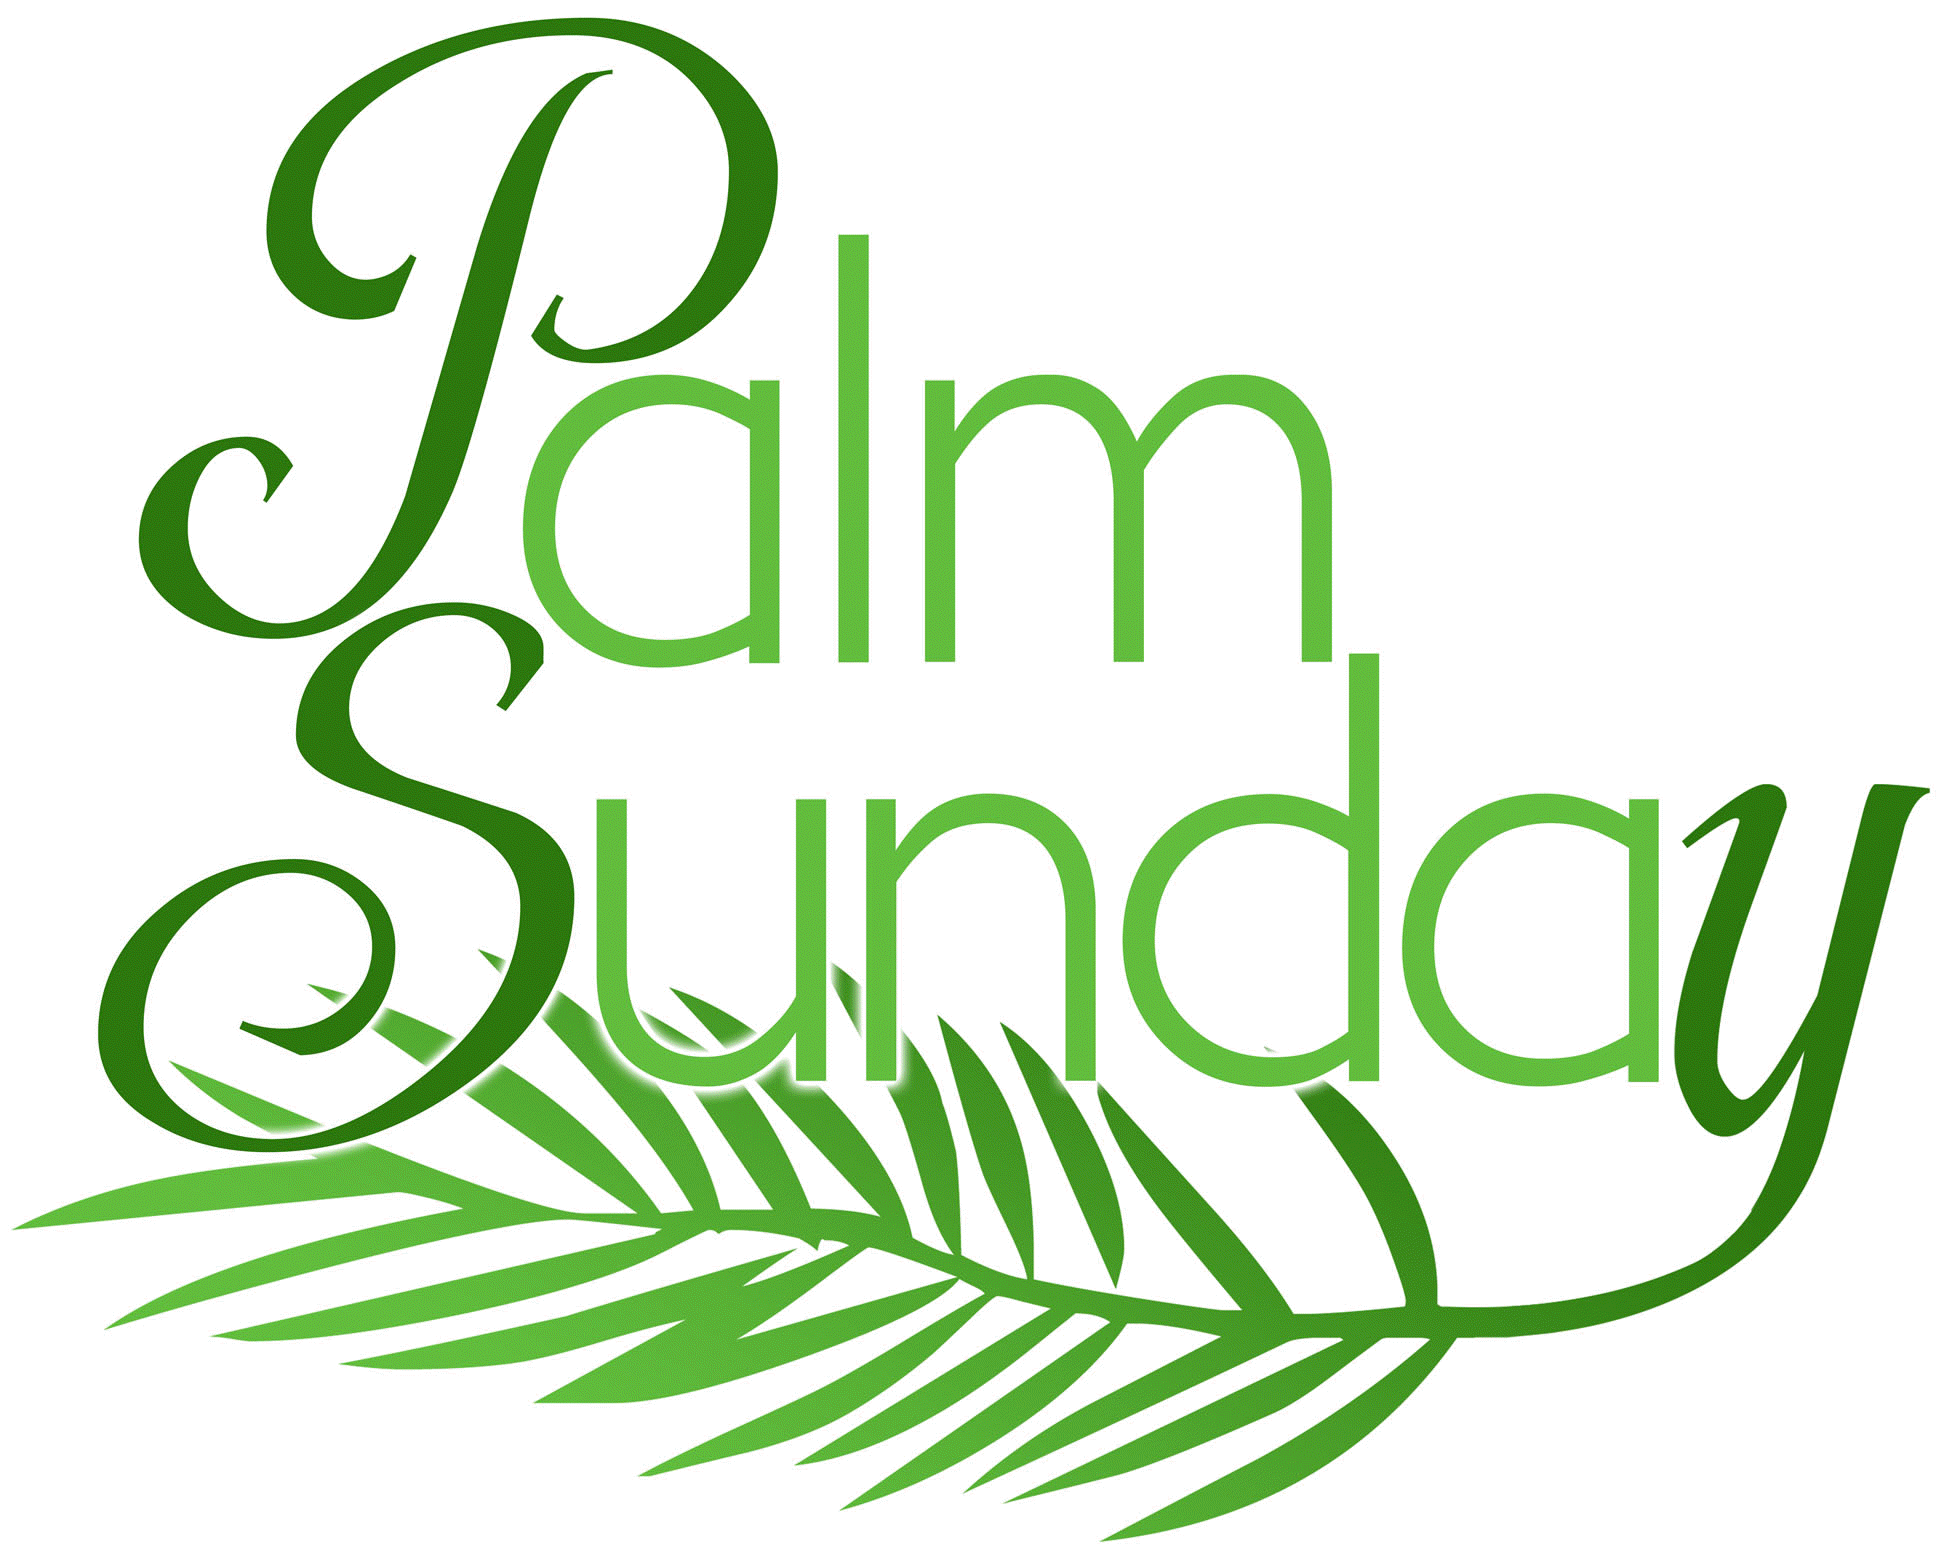 Happy Palm Sunday 2020 Whatsapp Status Dp fb Profile Cover Hd Wallpapers Images